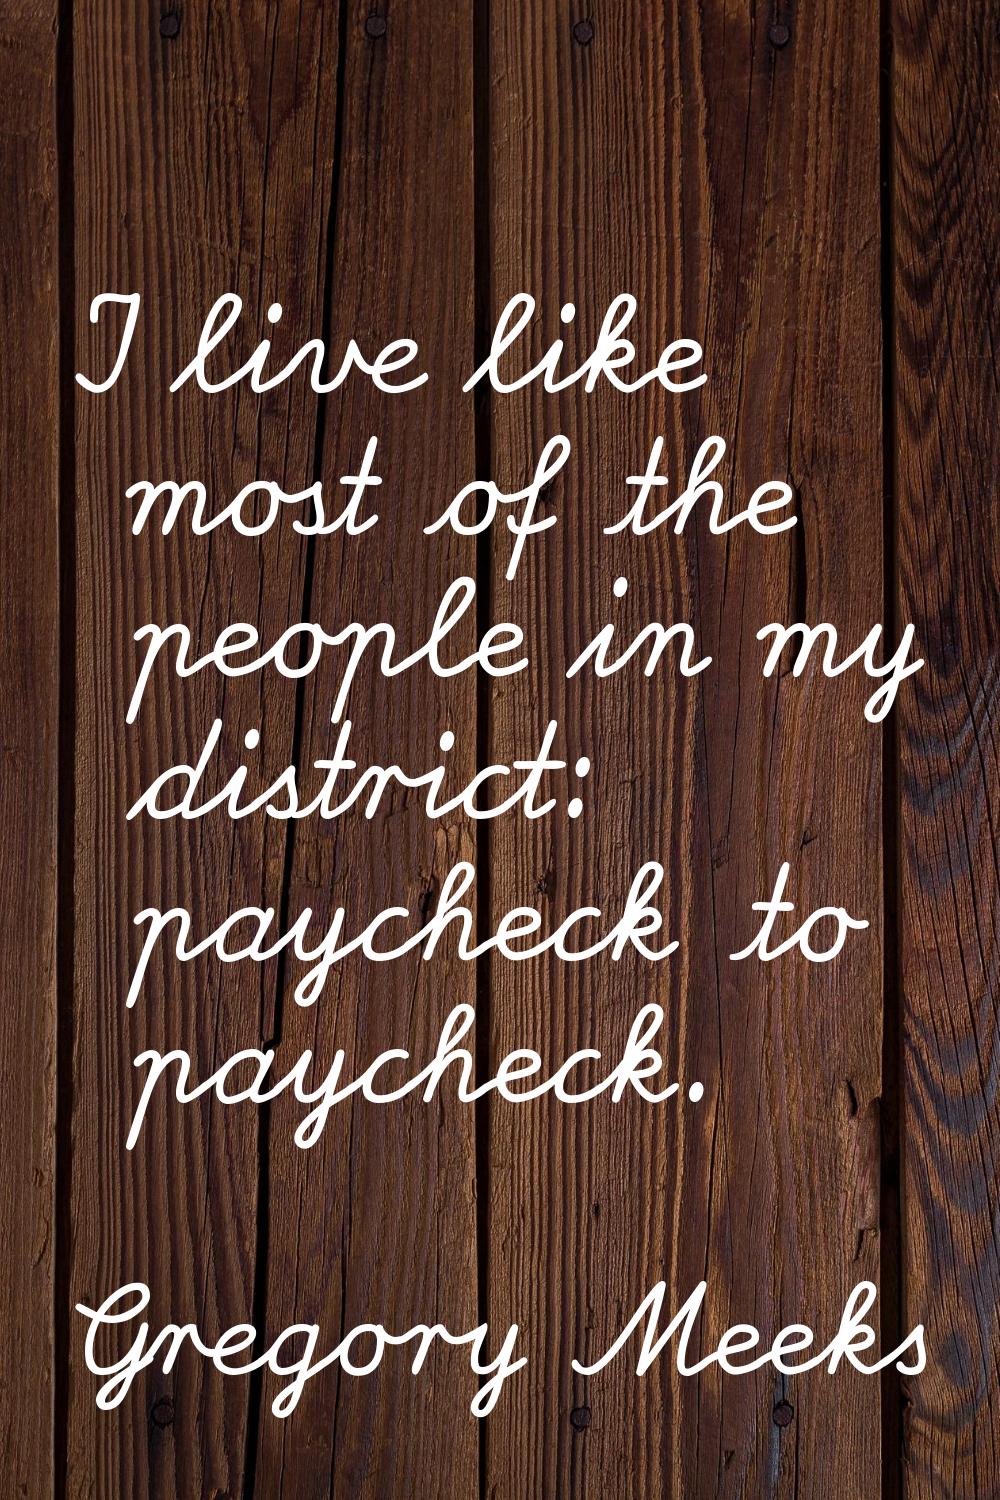 I live like most of the people in my district: paycheck to paycheck.